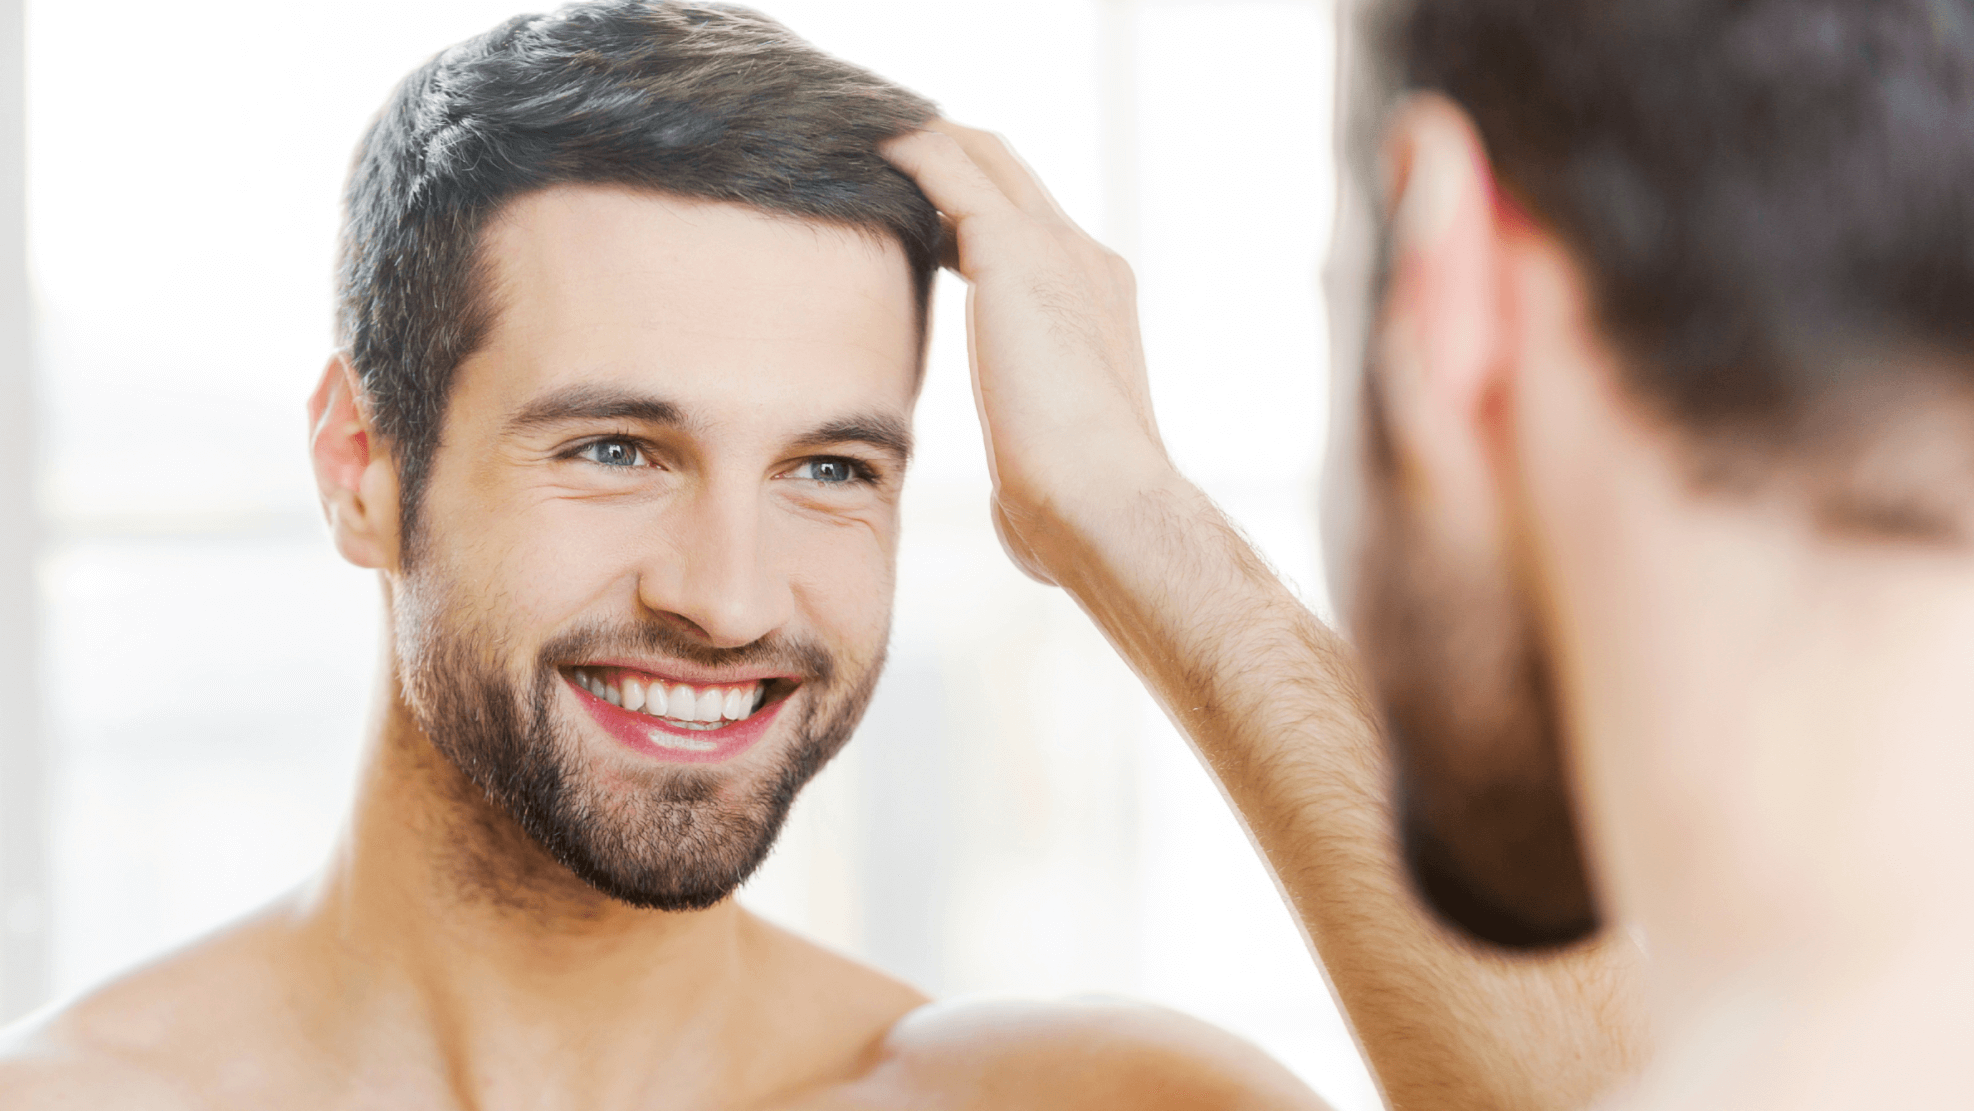 Could Your Hair Loss Be Caused by Hormone Imbalance?